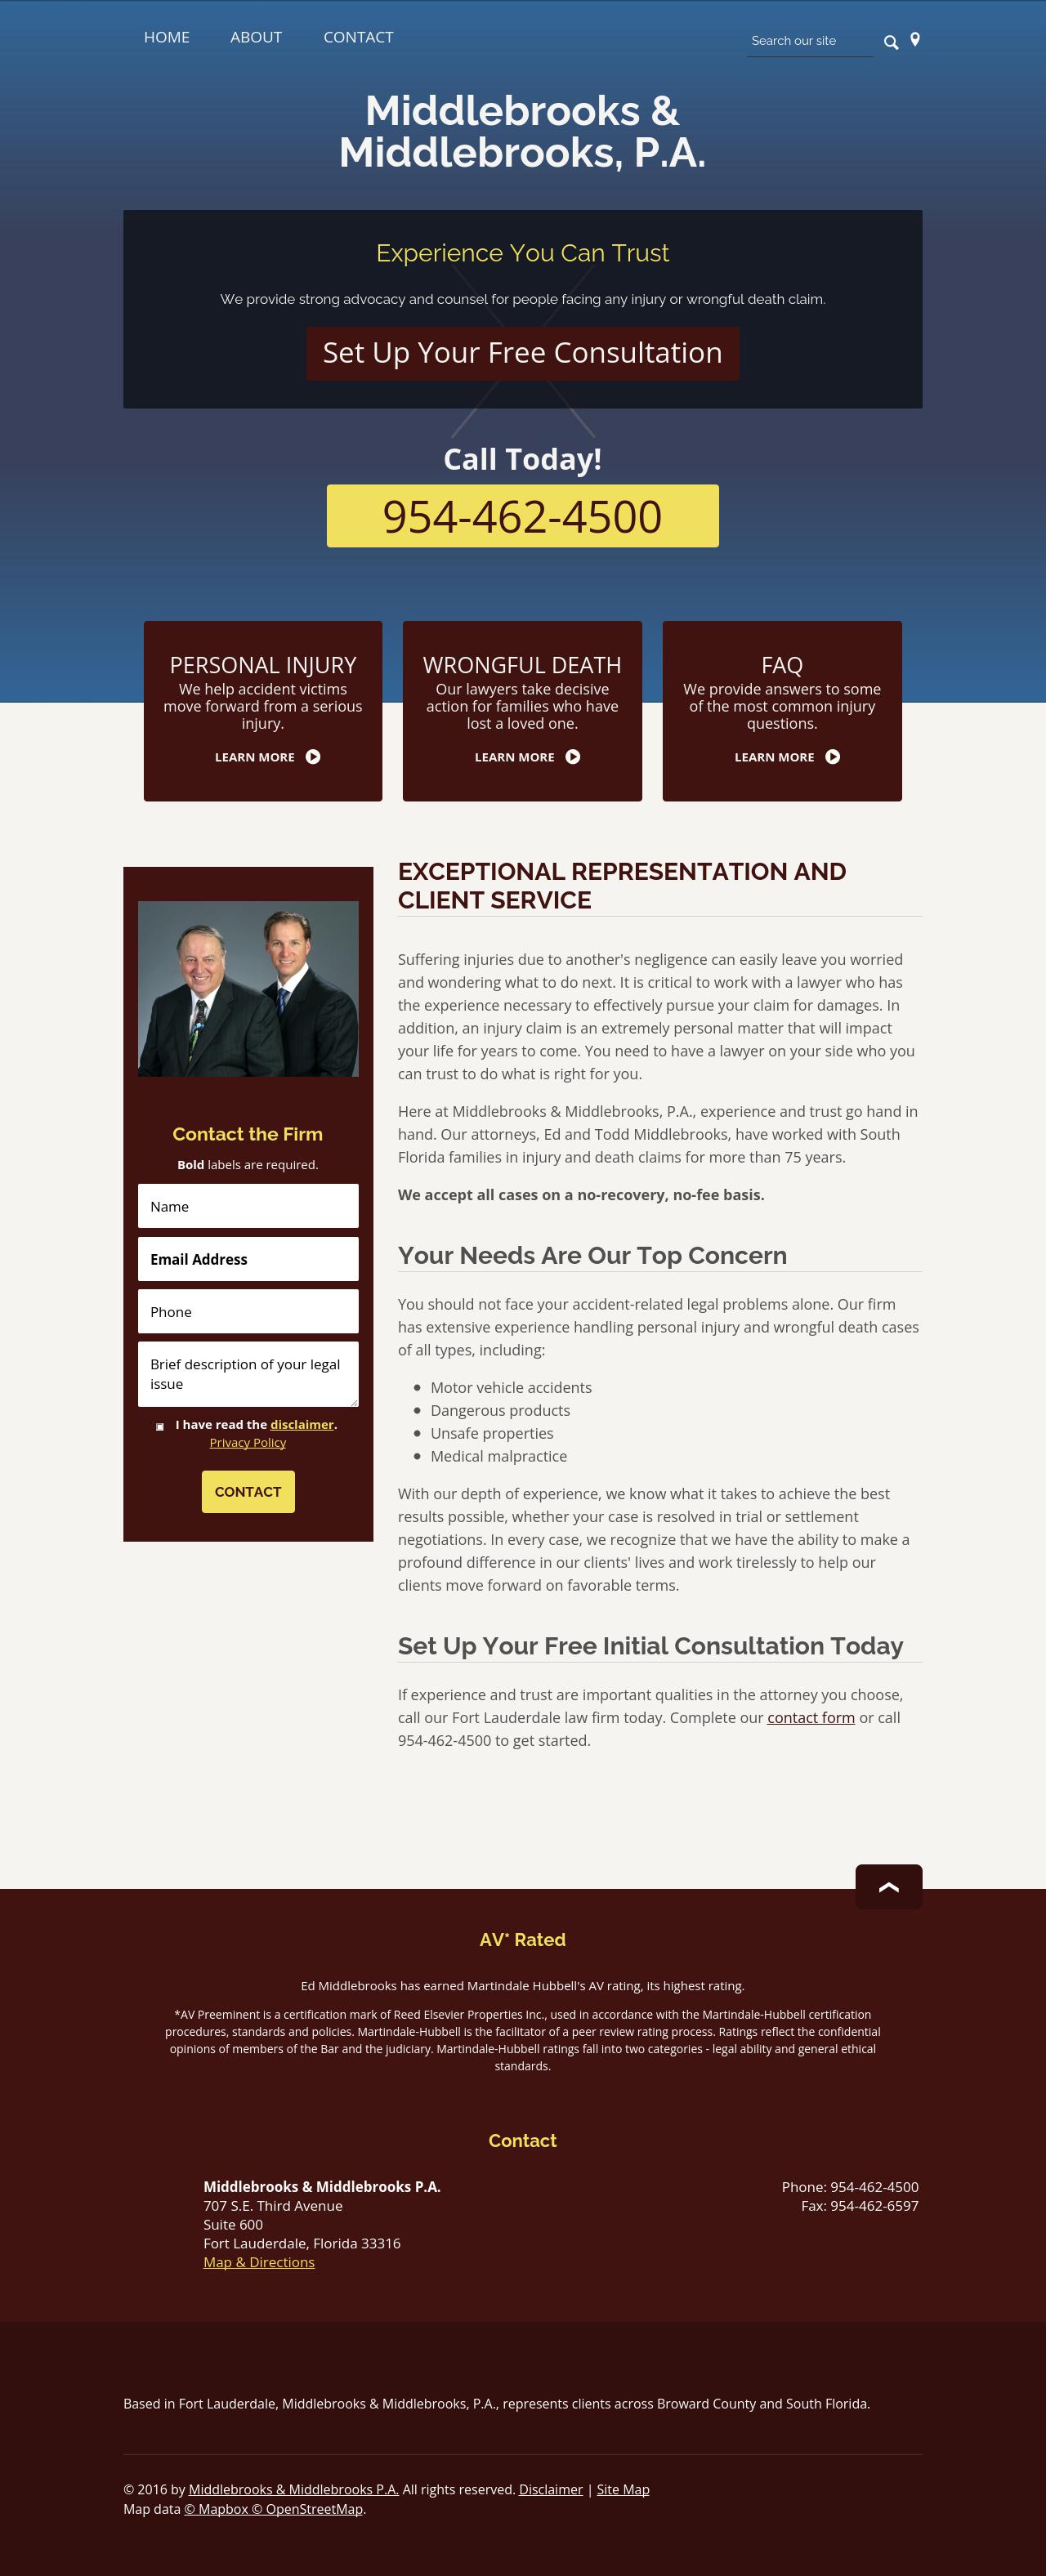 Middlebrooks & Middlebrooks P.A. - Fort Lauderdale FL Lawyers